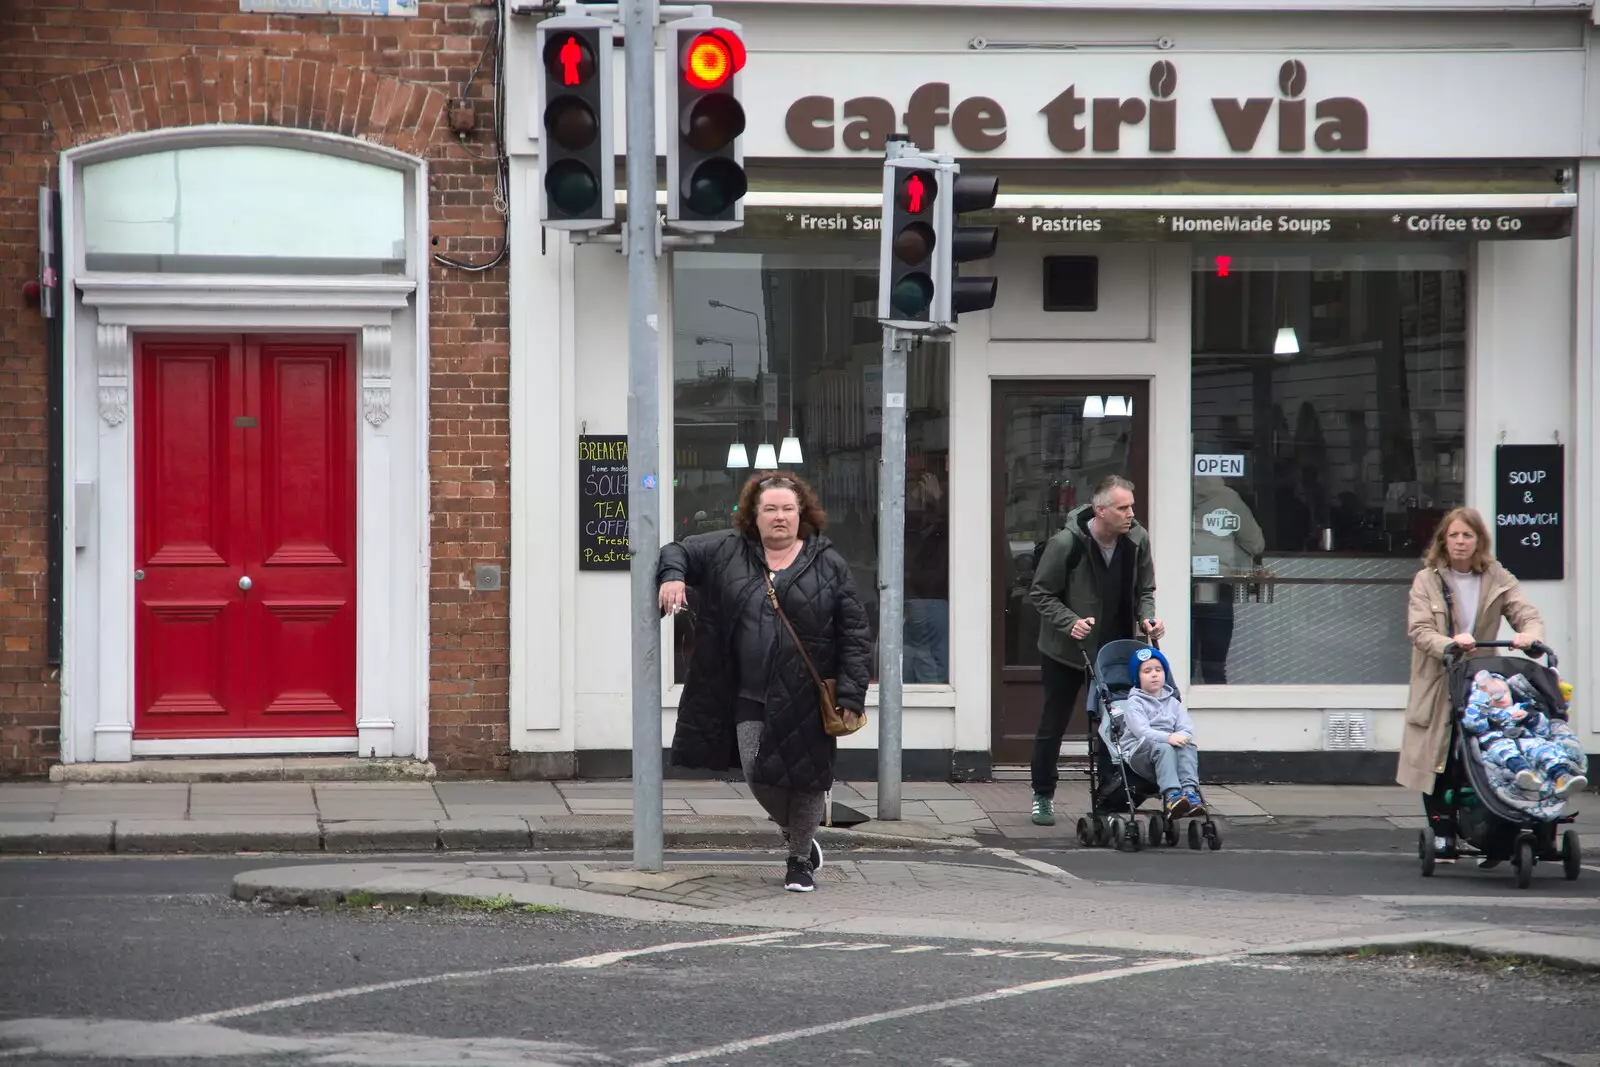 Louise waits at a pedestrian crossing, from The Dead Zoo, Dublin, Ireland - 17th February 2023